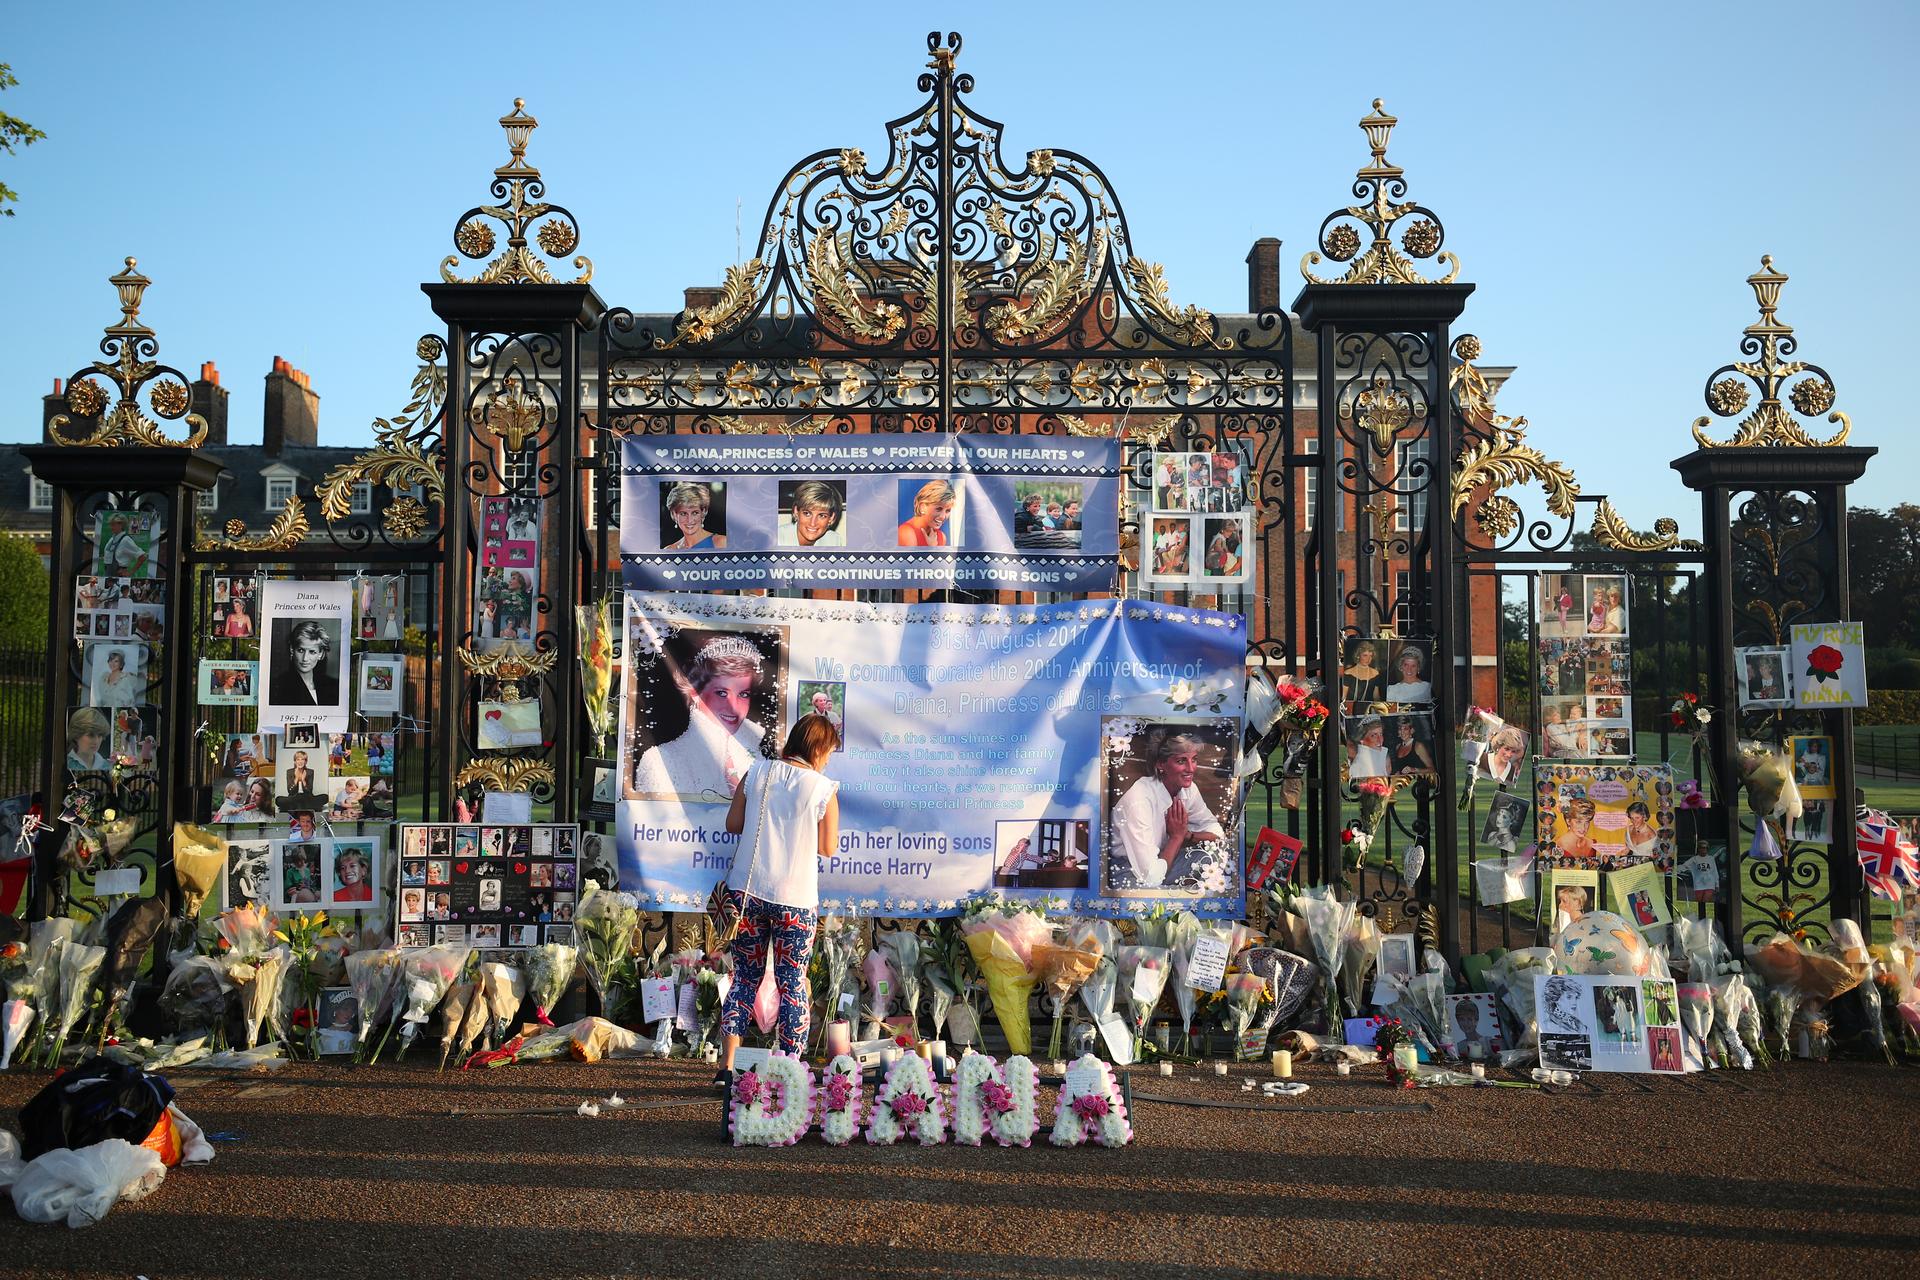 A royal fan looks at flowers and tributes left in memory of the late Princess Diana